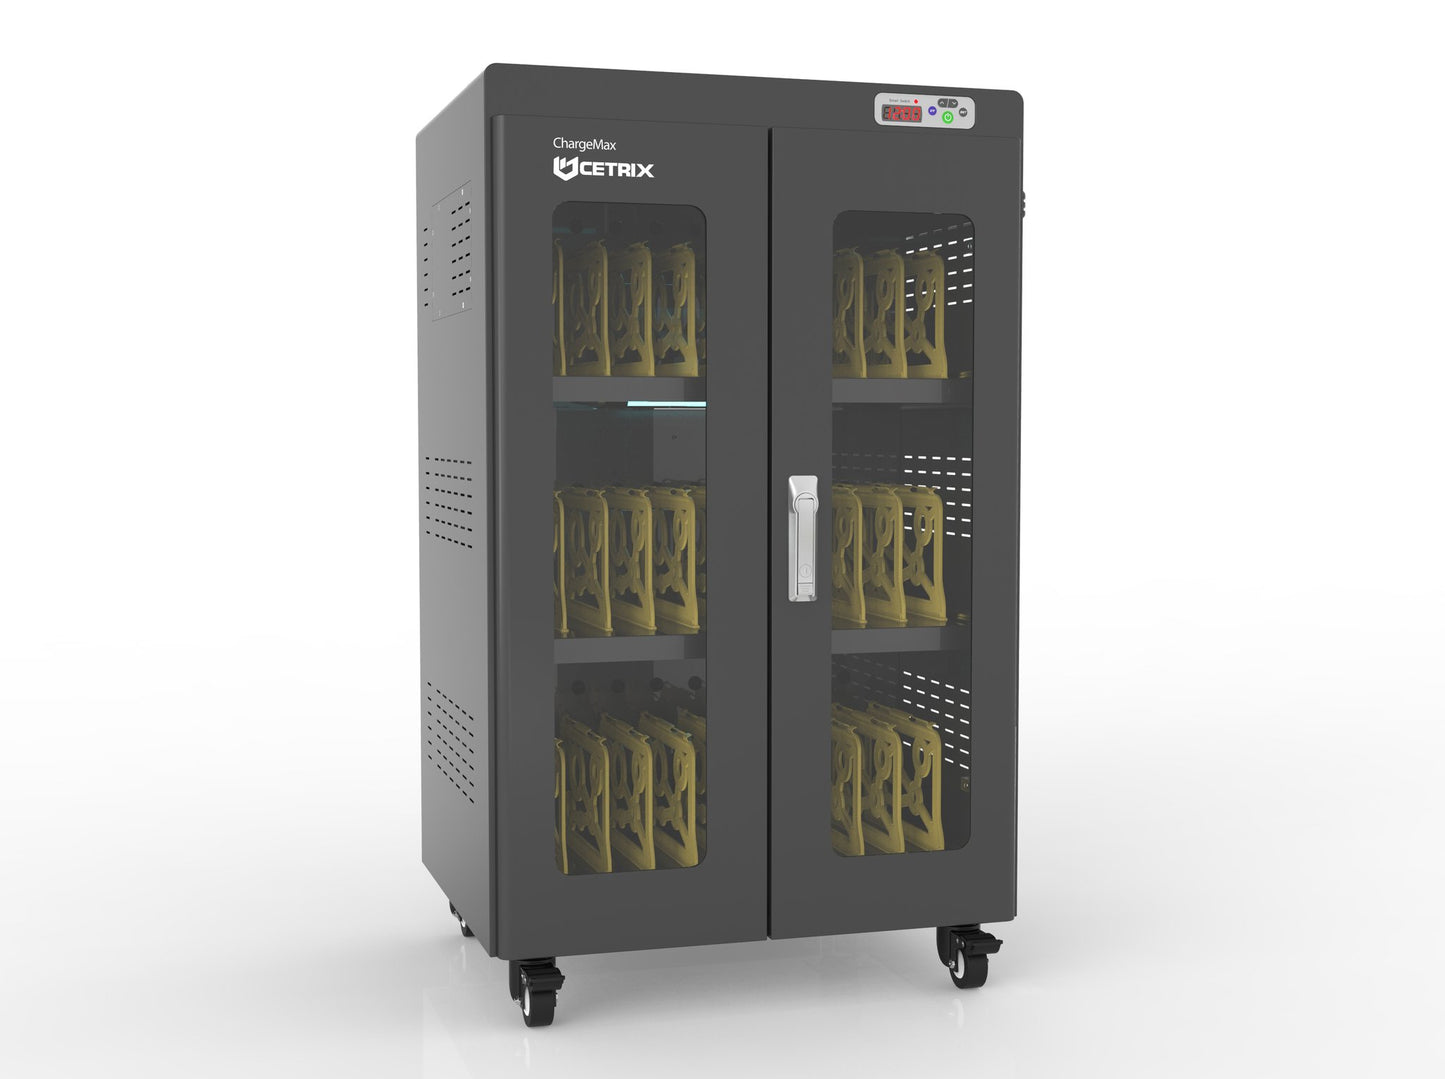 ChargeMax 40-bay Laptop Disinfection Charging Cabinet 4 Level / 40 Bays is safe and transparent to ... for charging devices within the cabinet (Laptop, Chromebook, Radio, etc.)